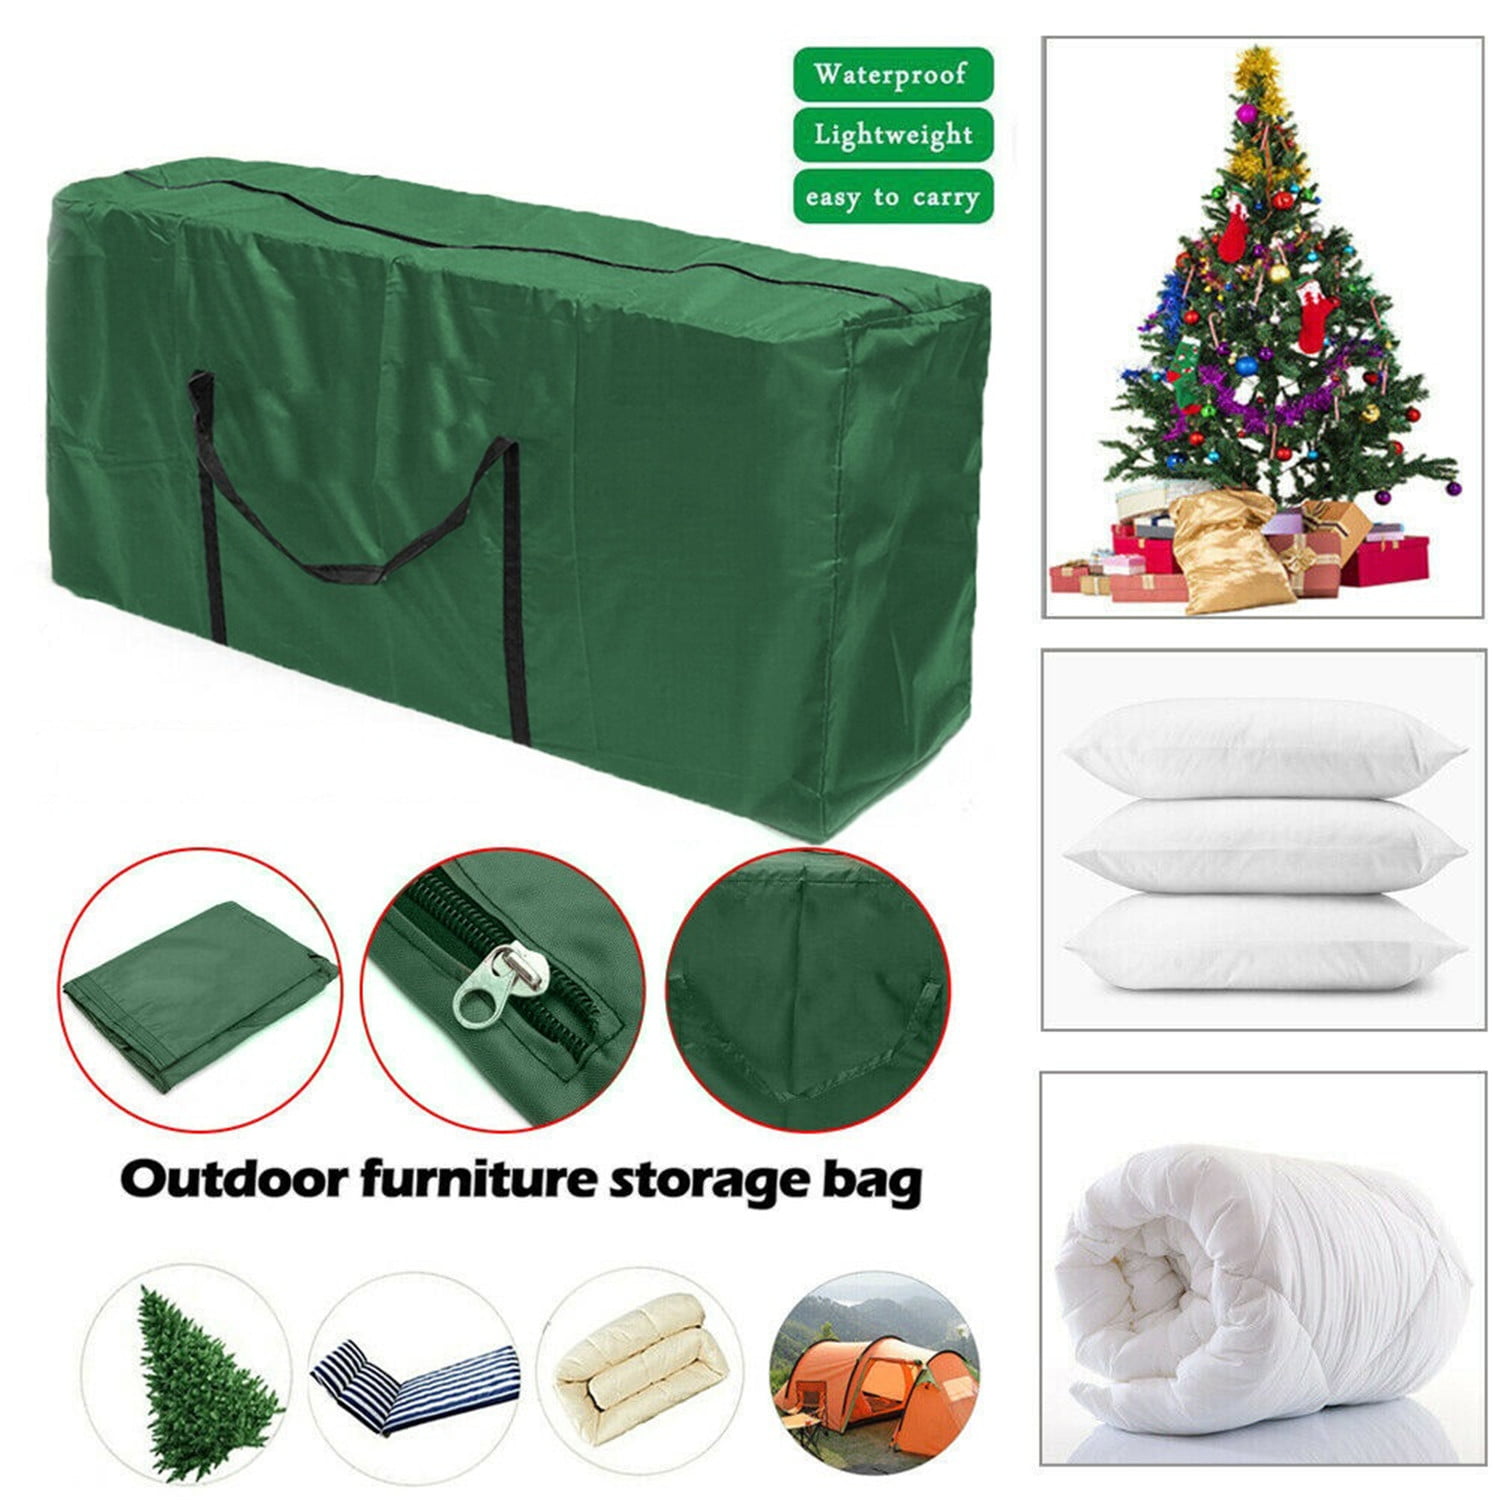 Black Christmas Tree Storage Bag Waterproof Material Christmas Items Bag Protects from Dust Fits Up to Holiday Artificial Disassembled Trees with Durable Reinforced Handles /& Dual Zipper